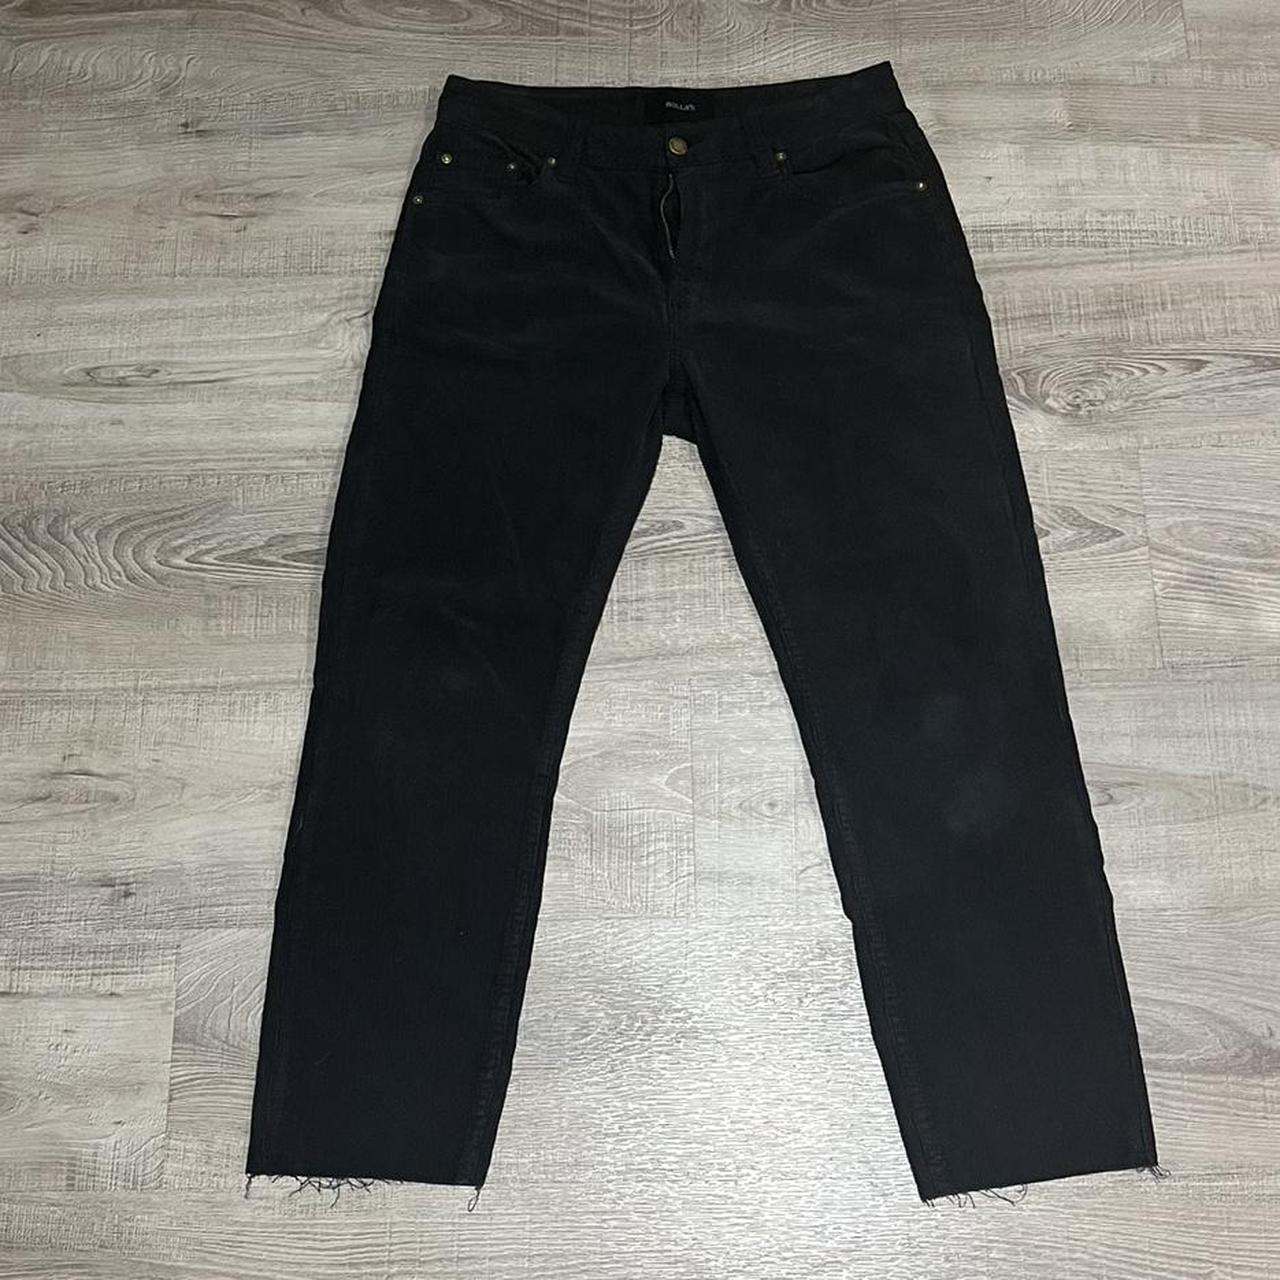 Rolla’s Relaxed Fit Corduroy Pants Open to... - Depop